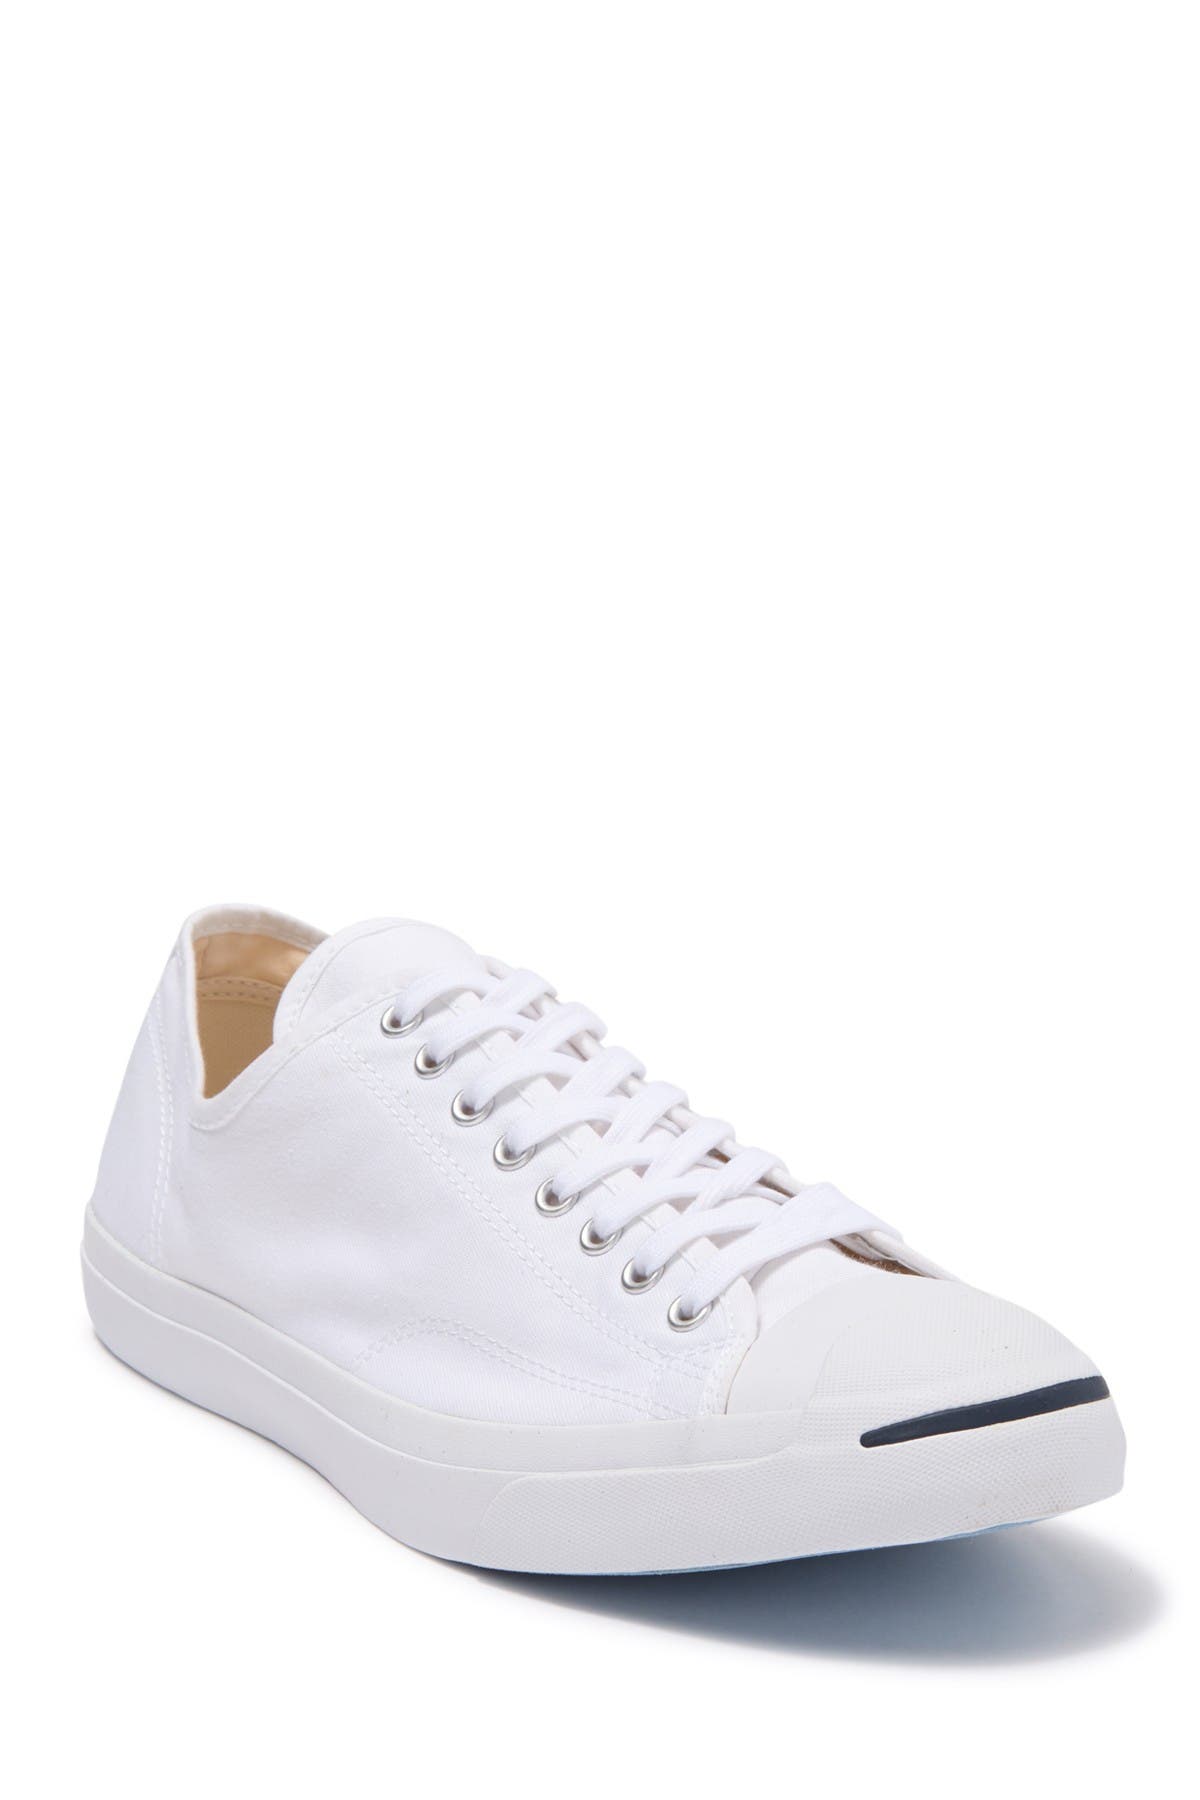 Converse | Jack Purcell Sneaker 